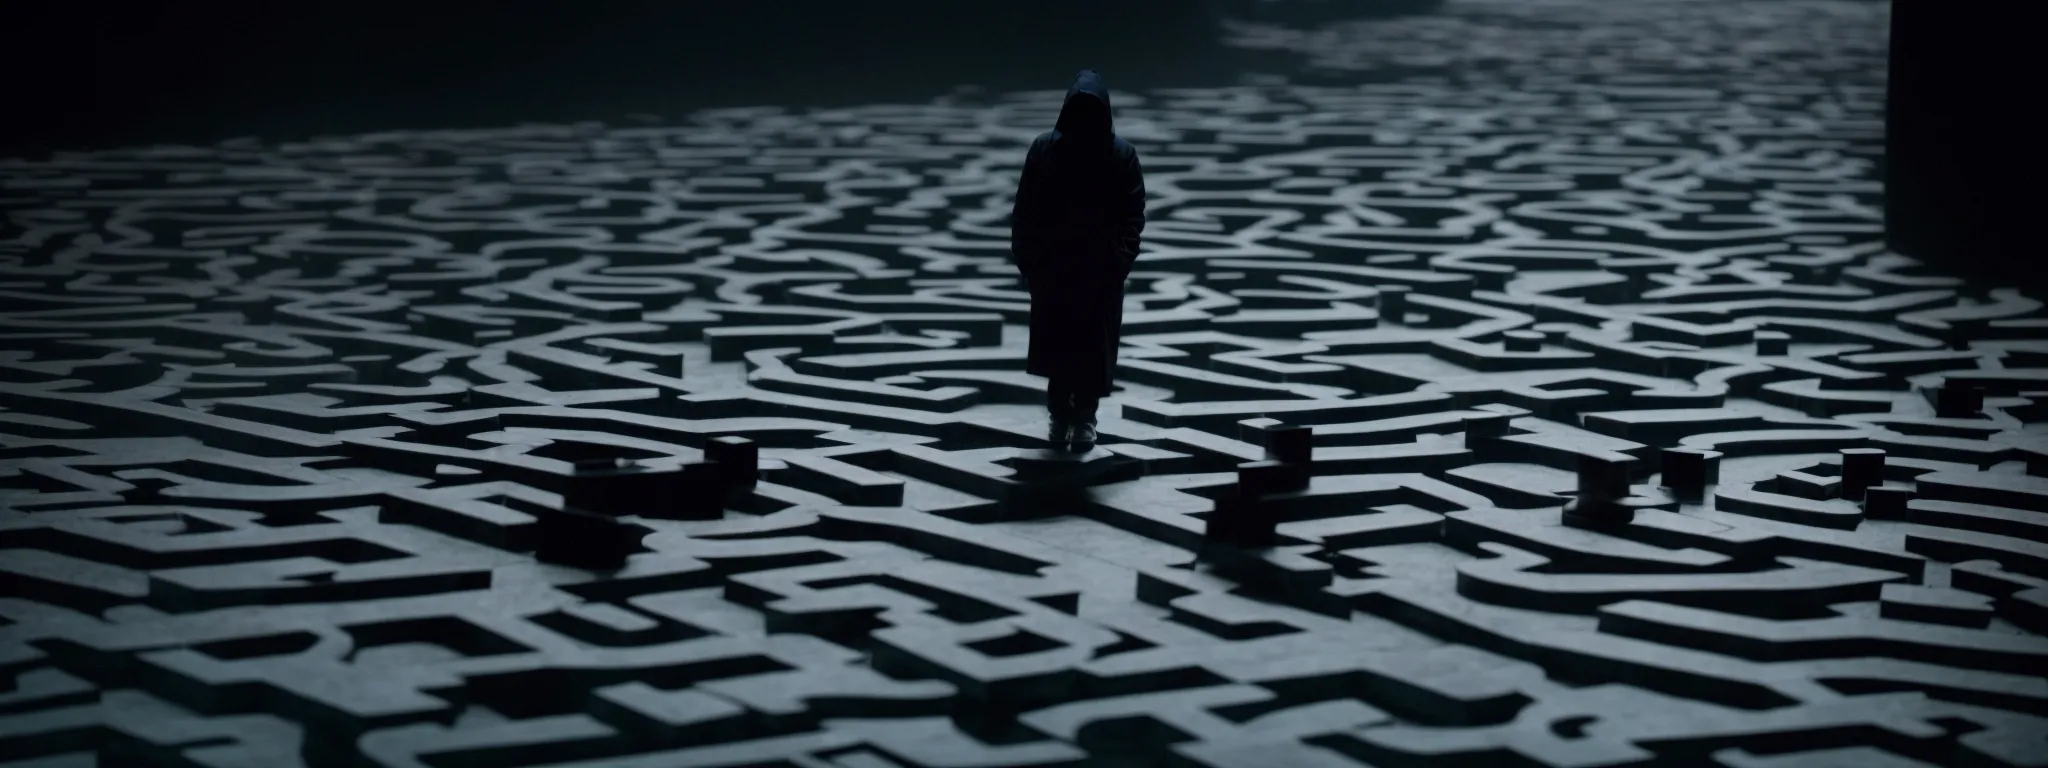 a shadowy figure stealthily adjusting the puzzle pieces of a web-shaped maze.